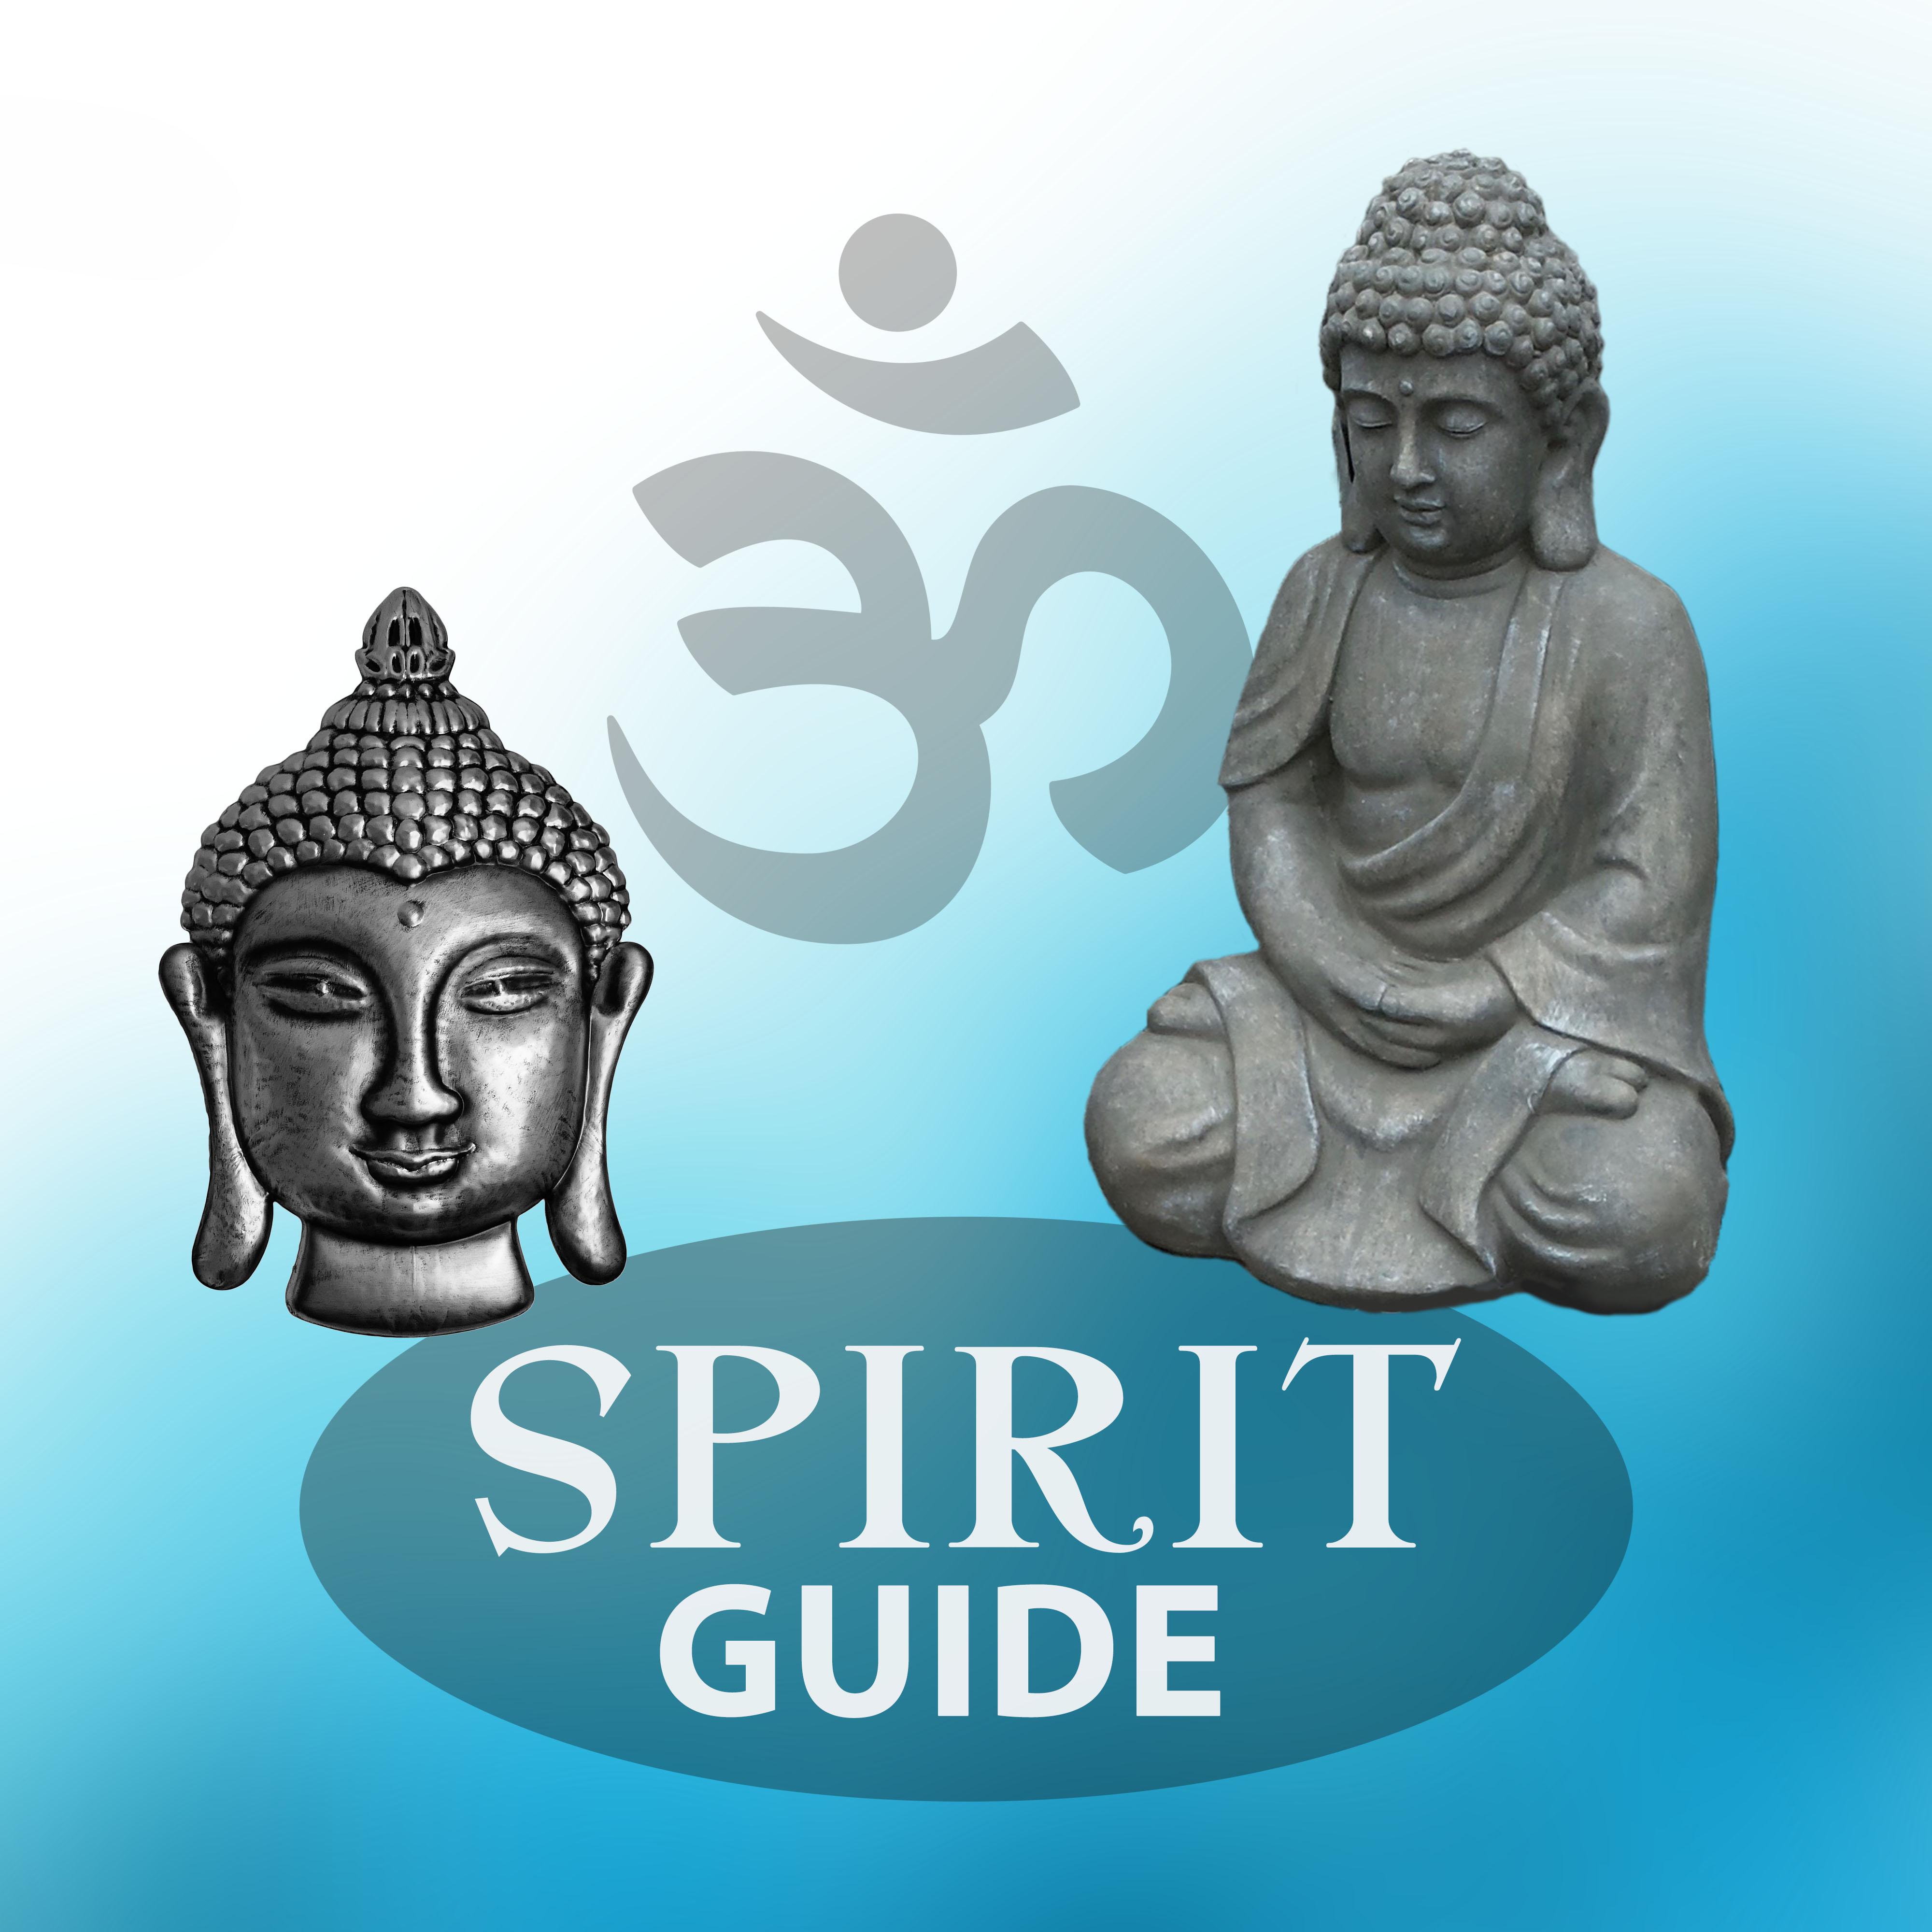 Spirit Guide  Meditation Music, New Age Sounds, Spirit Calmness, Nature Sounds, Chill All Day